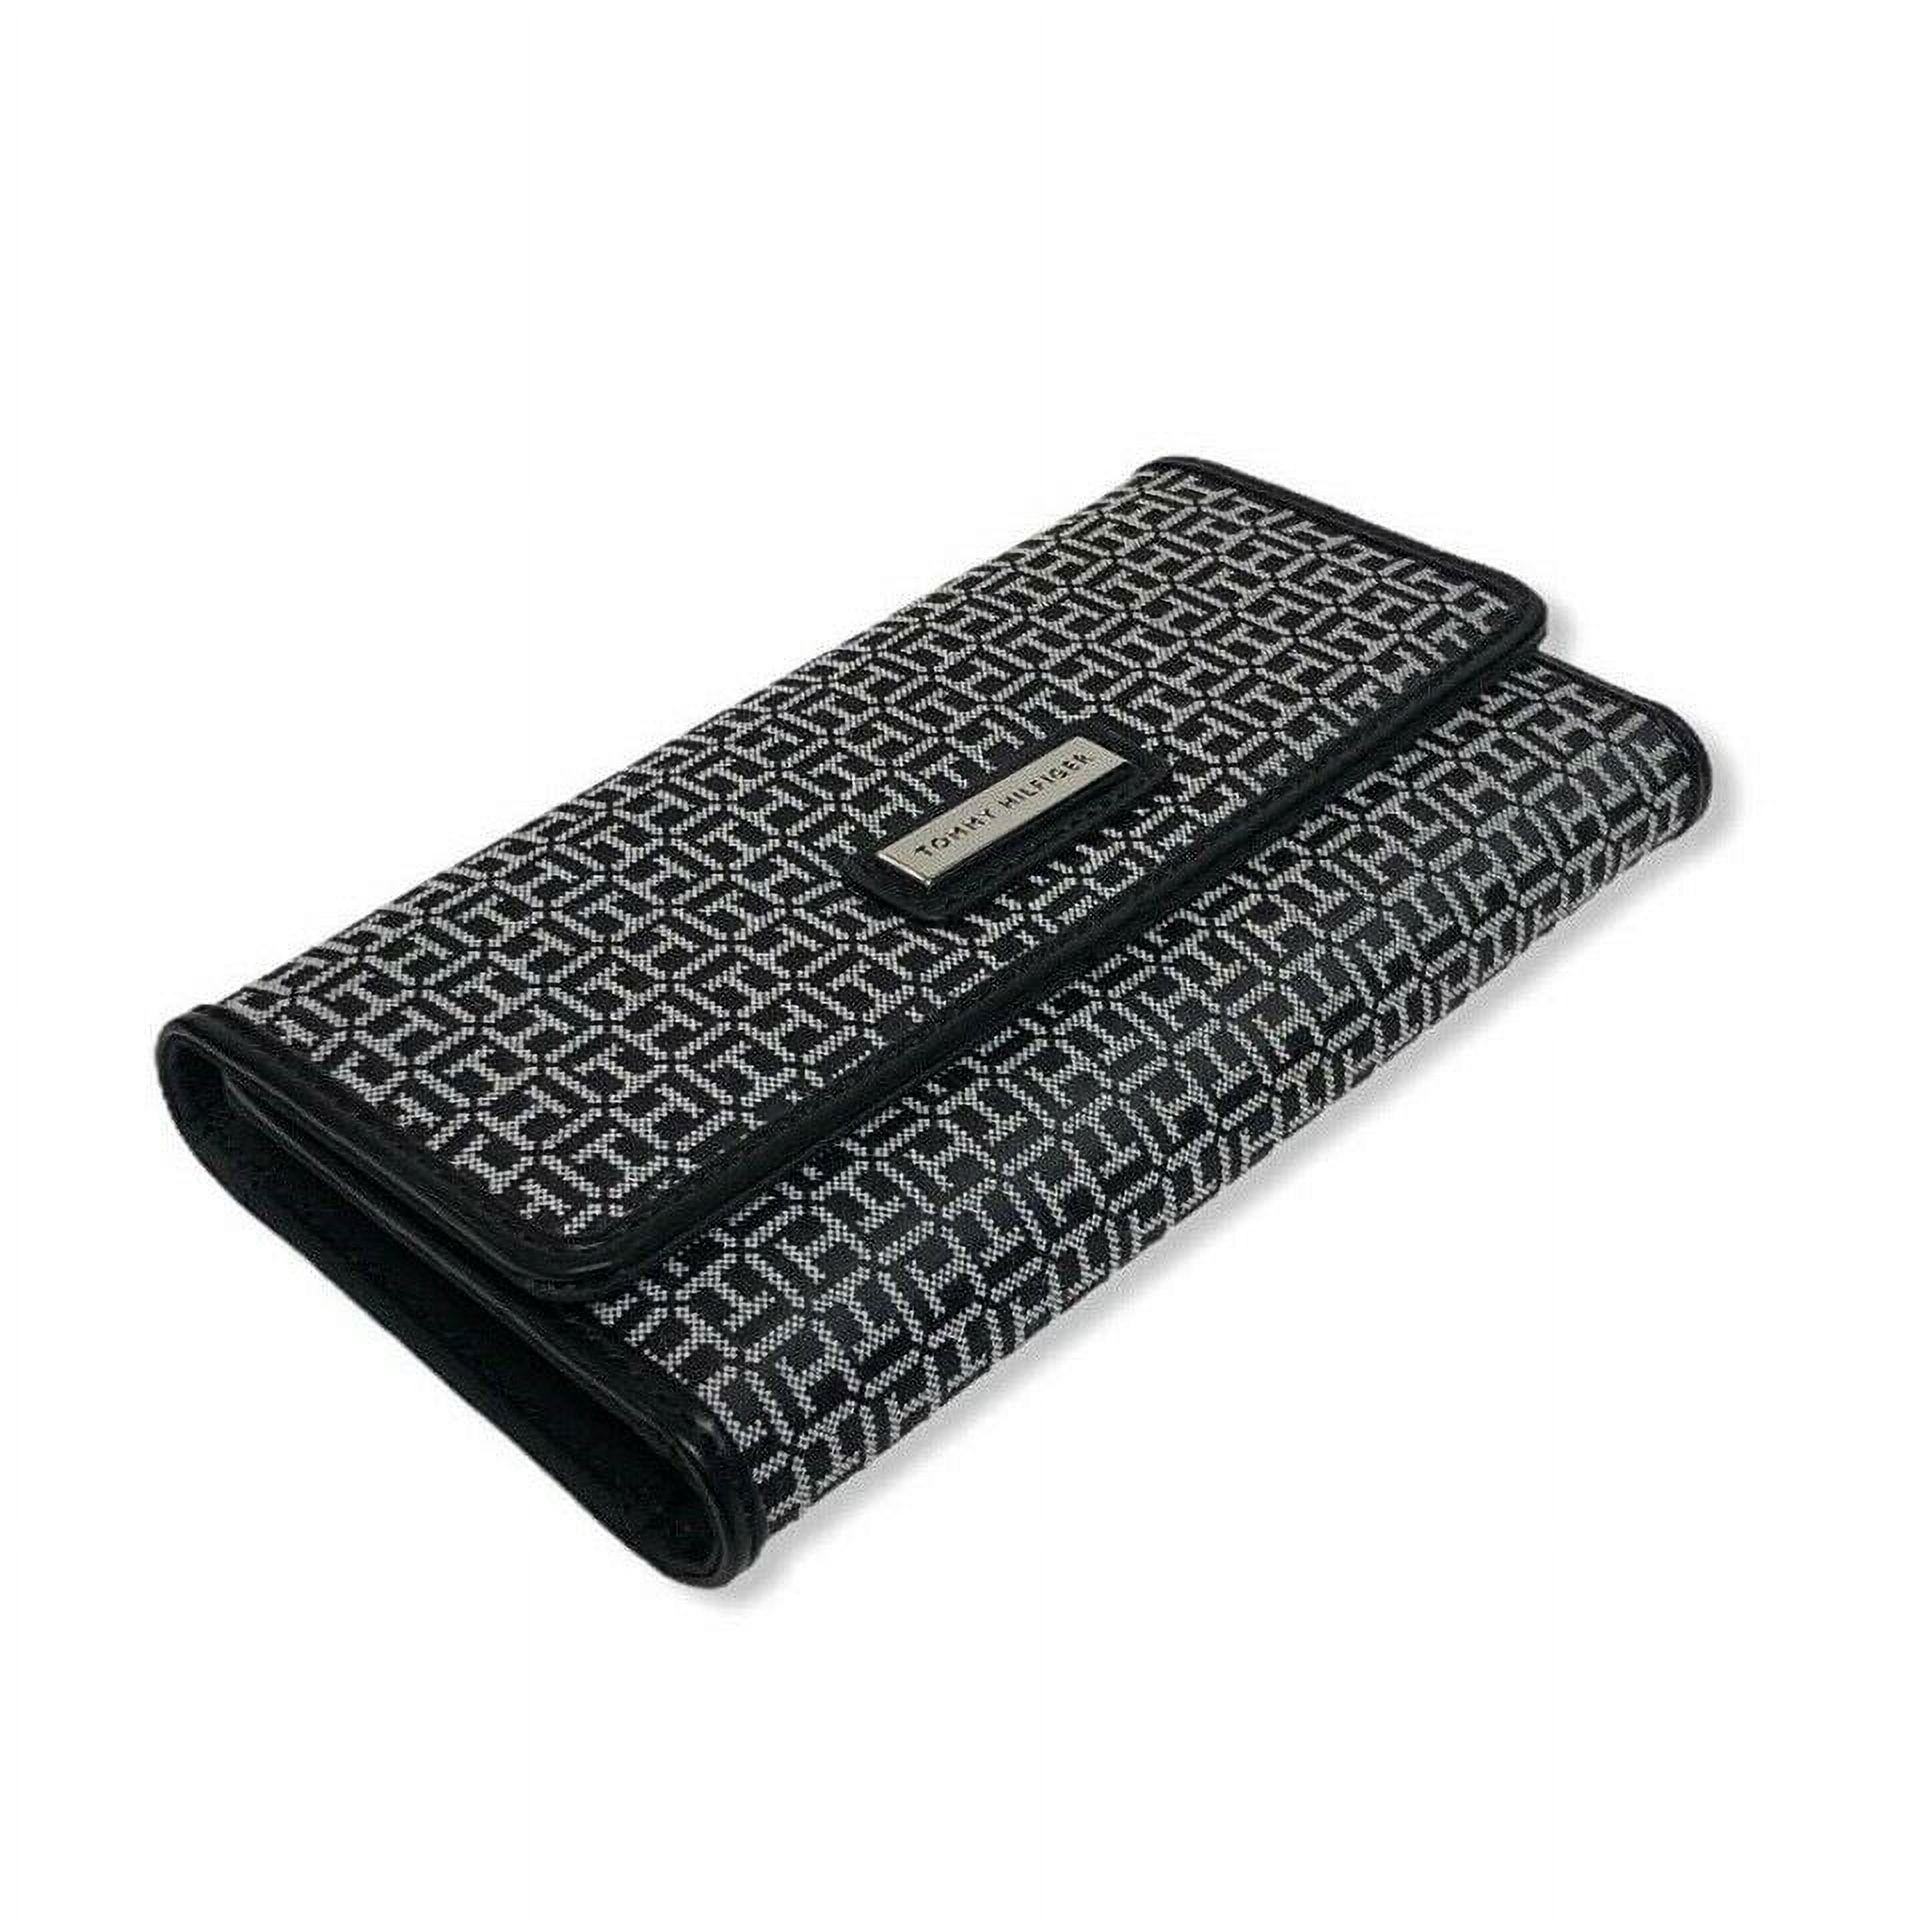 Tommy Hilfiger Womens Wallet Snap Closure Trifold Casual Checkbook - Black TH Monogram - image 3 of 3